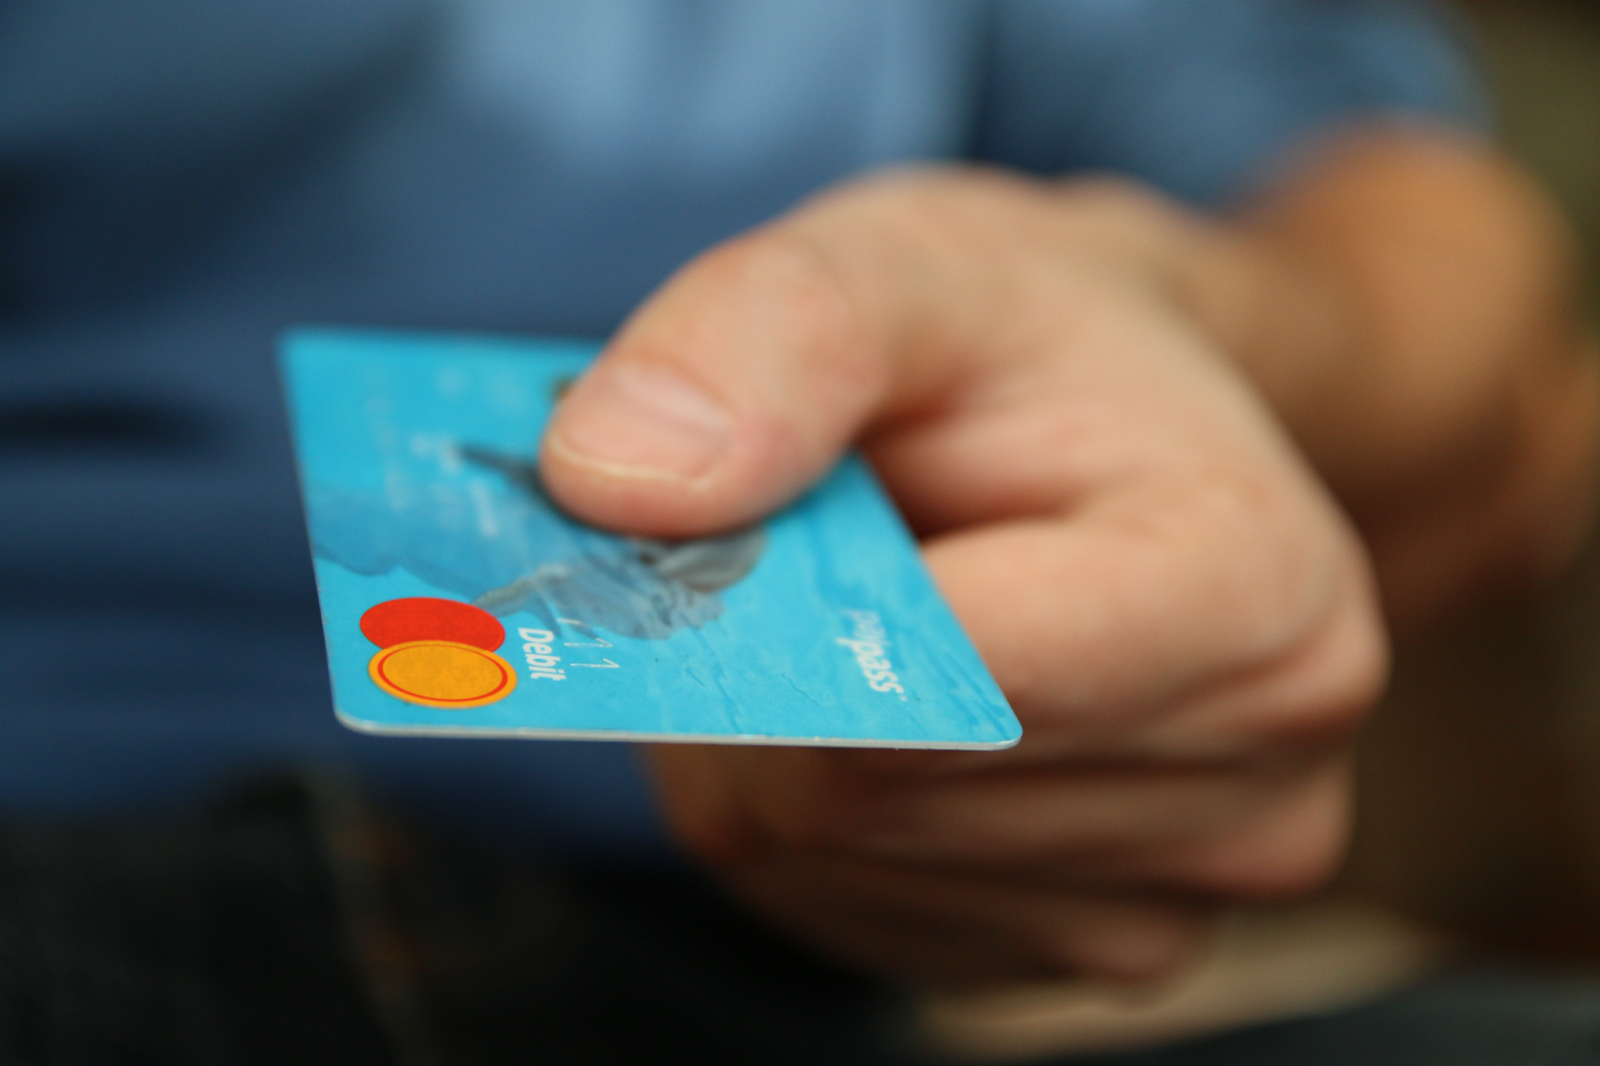 person holding a debit card